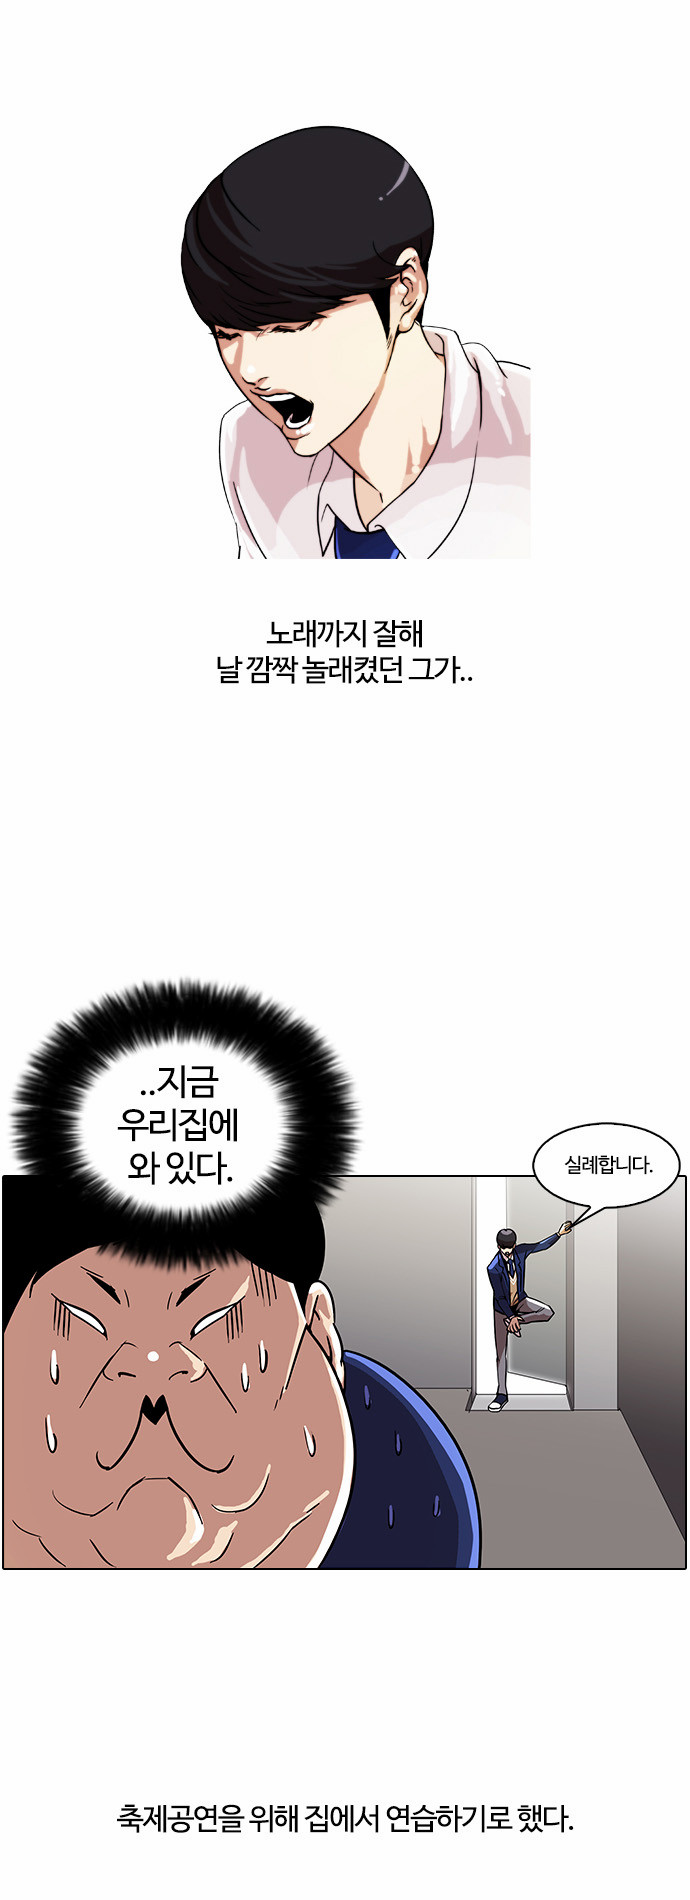 Lookism - Chapter 23 - Page 2